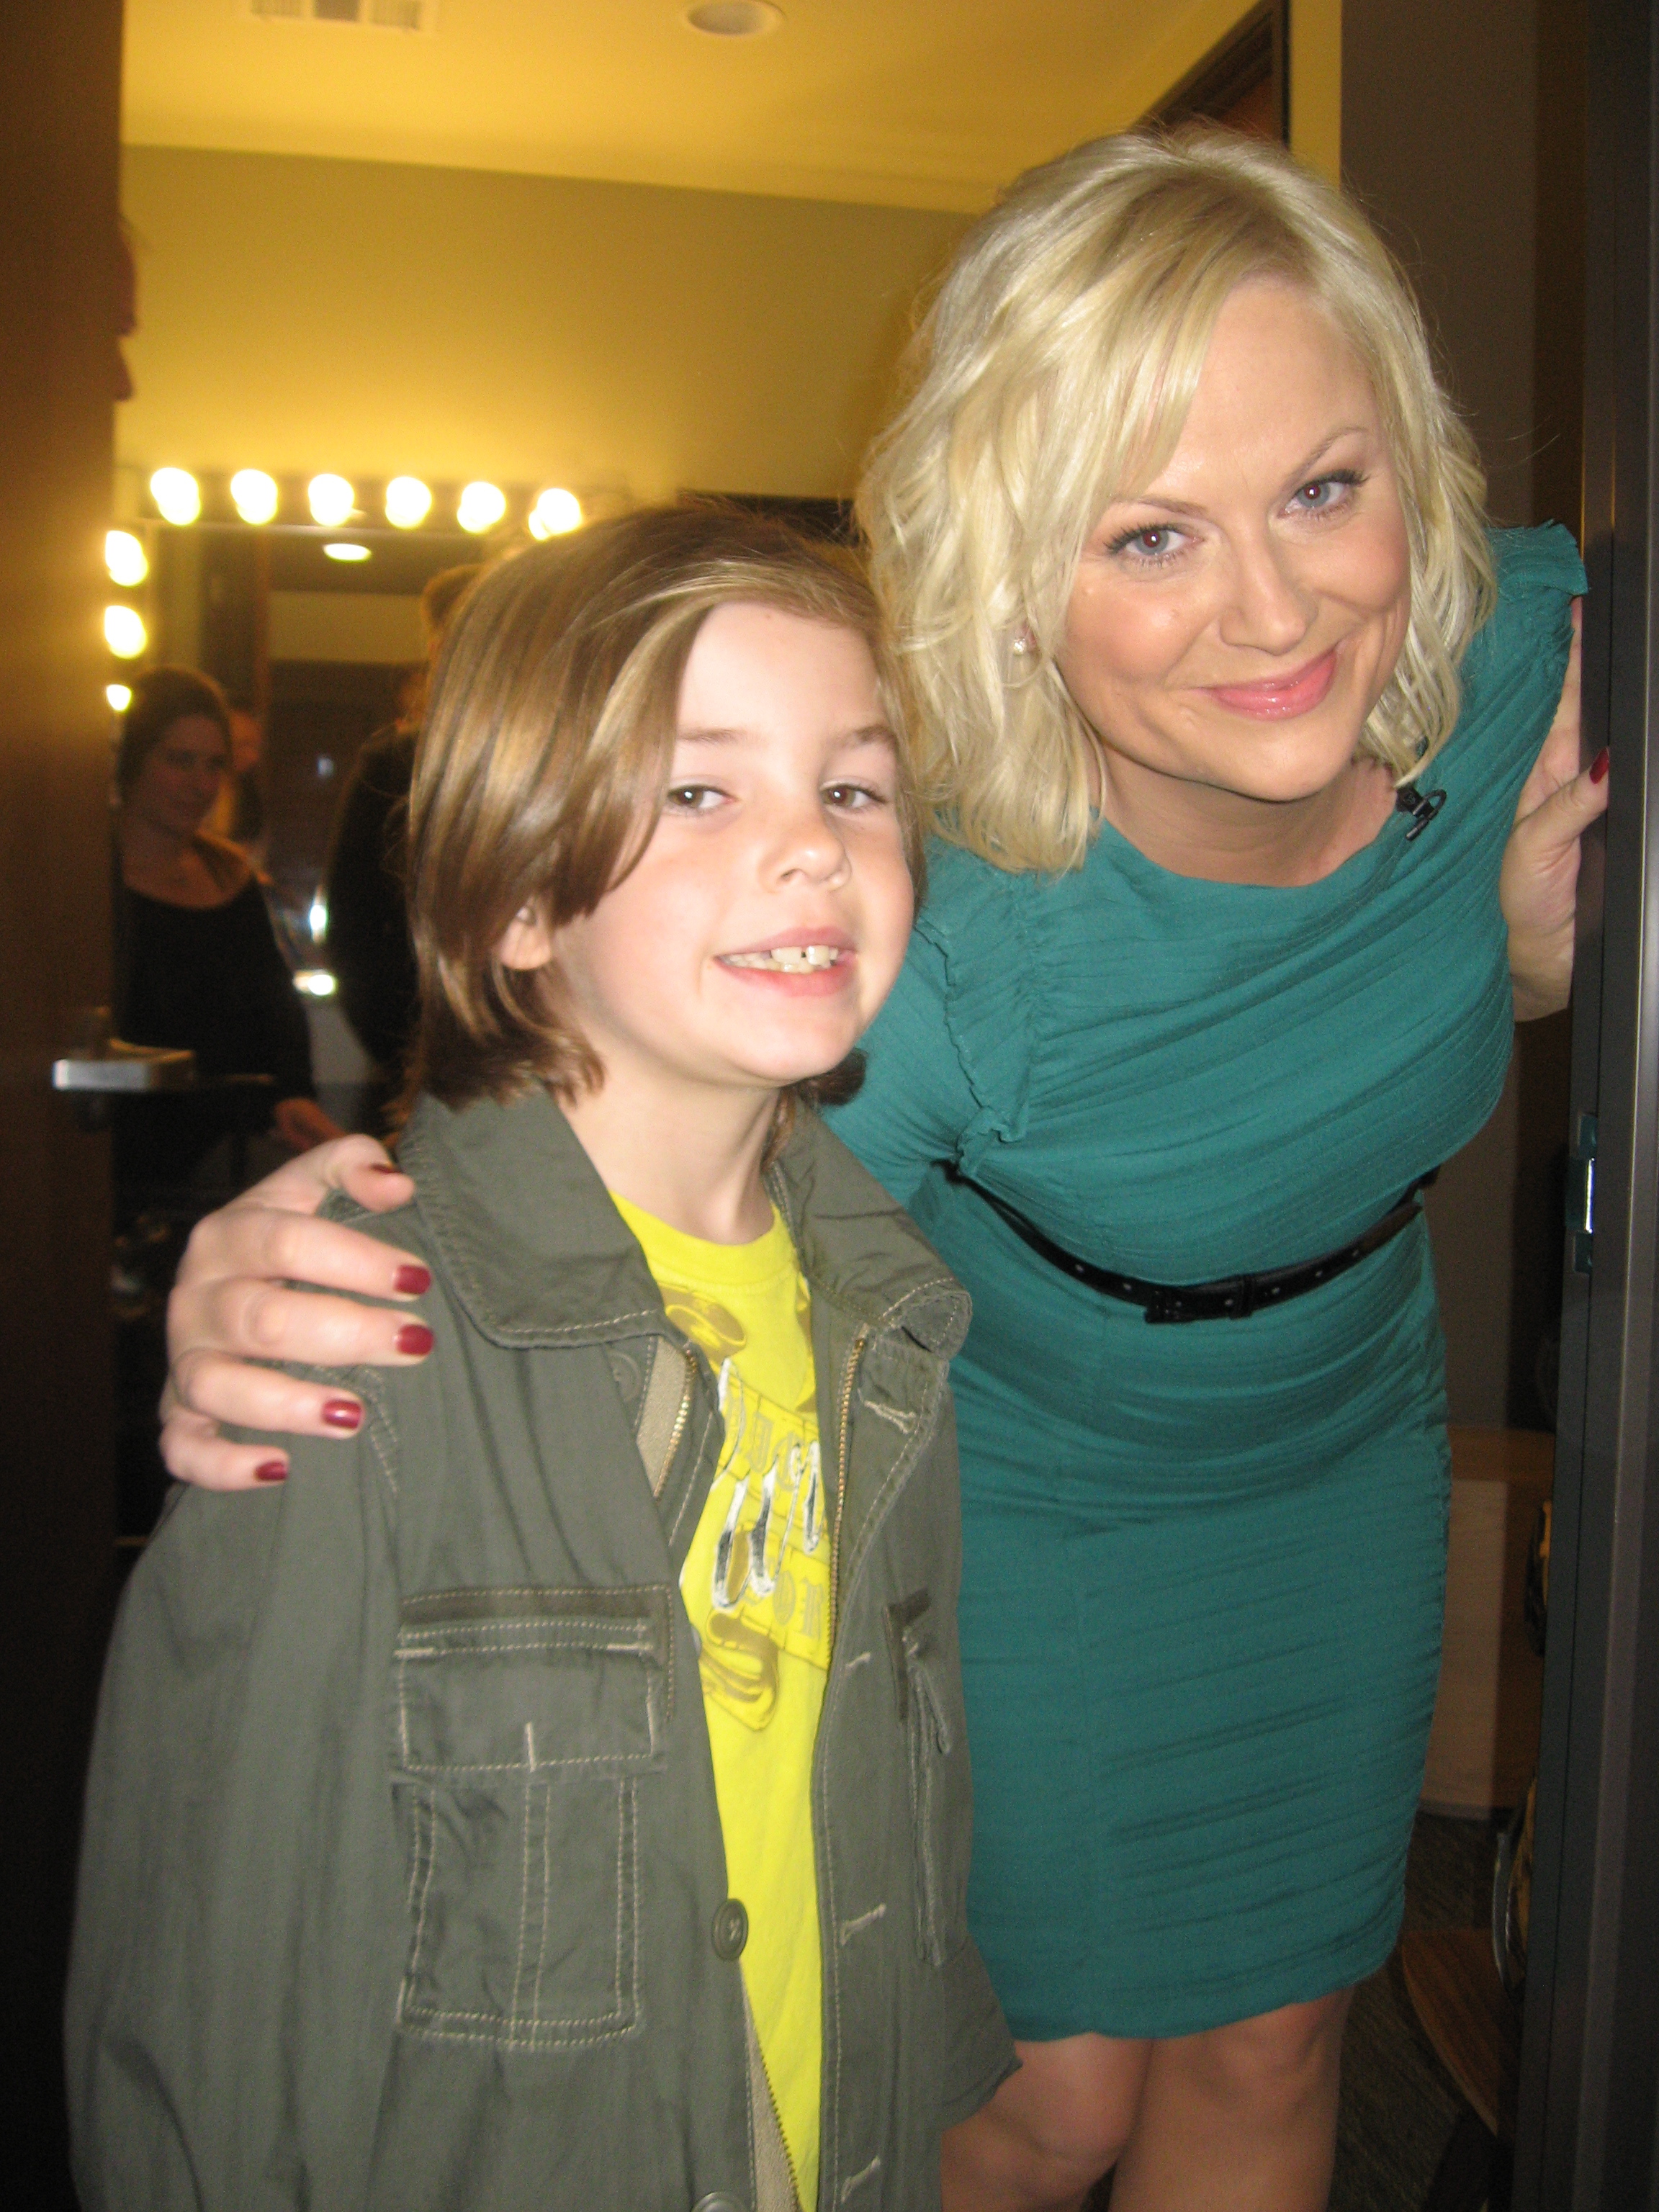 Gabriele and Amy Poehler on set of Conan